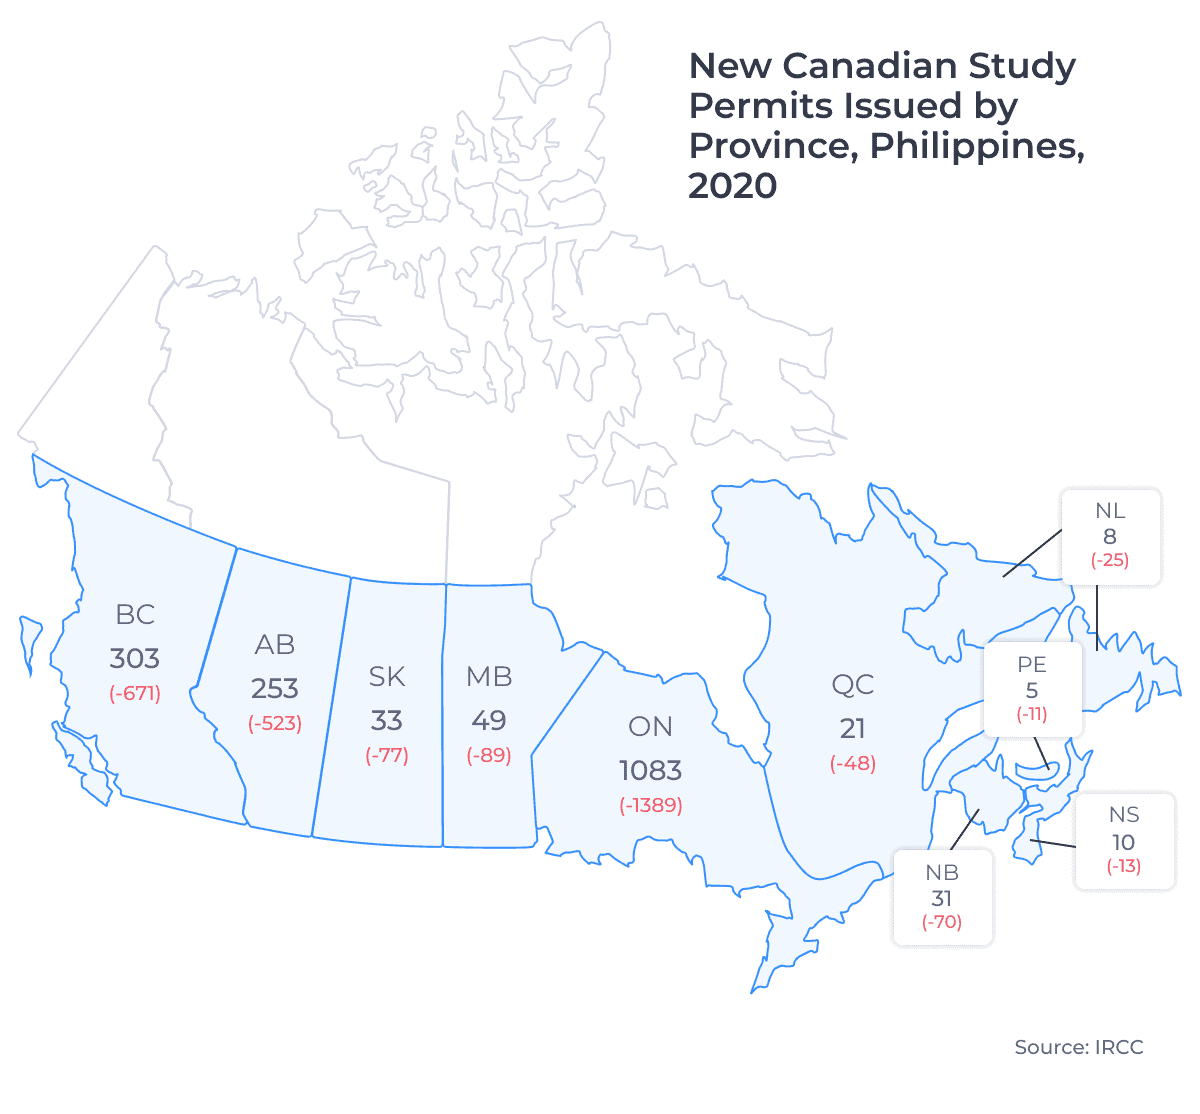 New Canadian Study Permits Issued to Filipino Students by Province, 2020